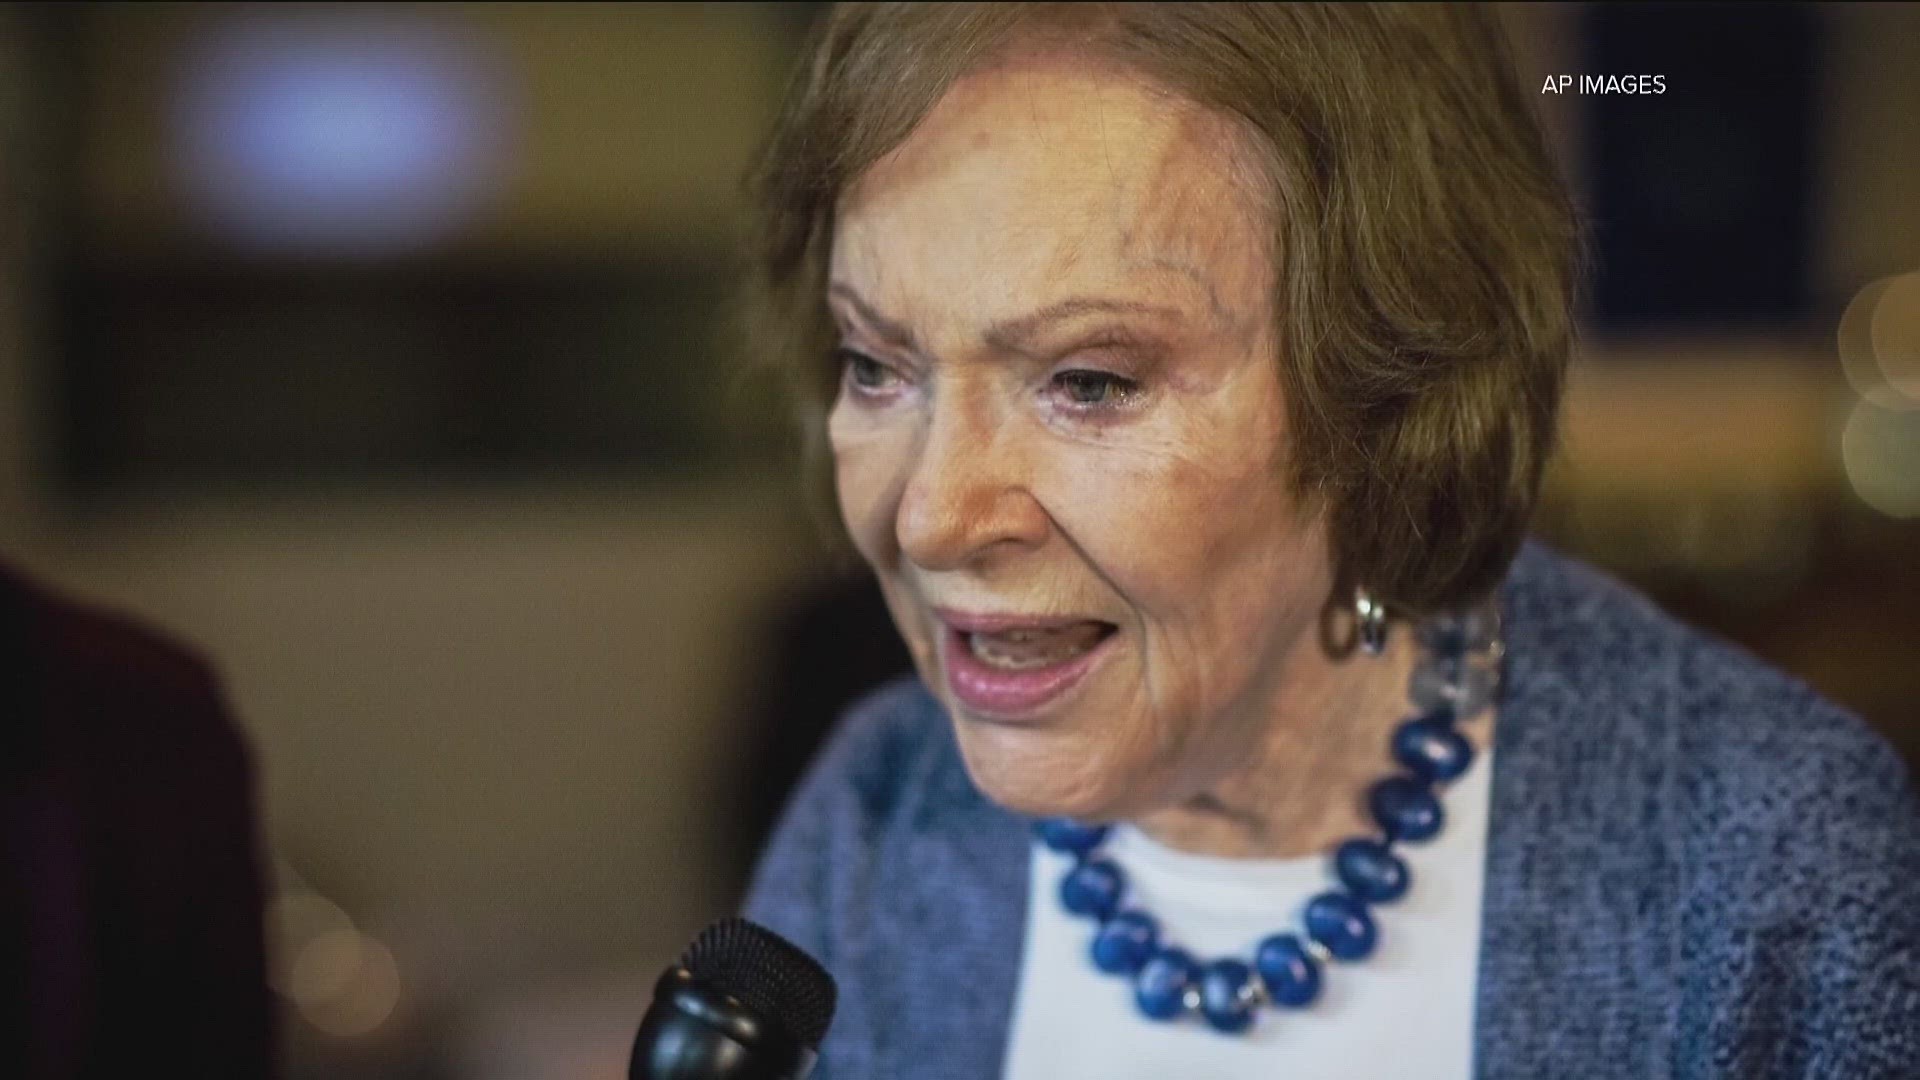 With word of her diagnosis, Rosalynn Carter’s light is shining brighter than ever.